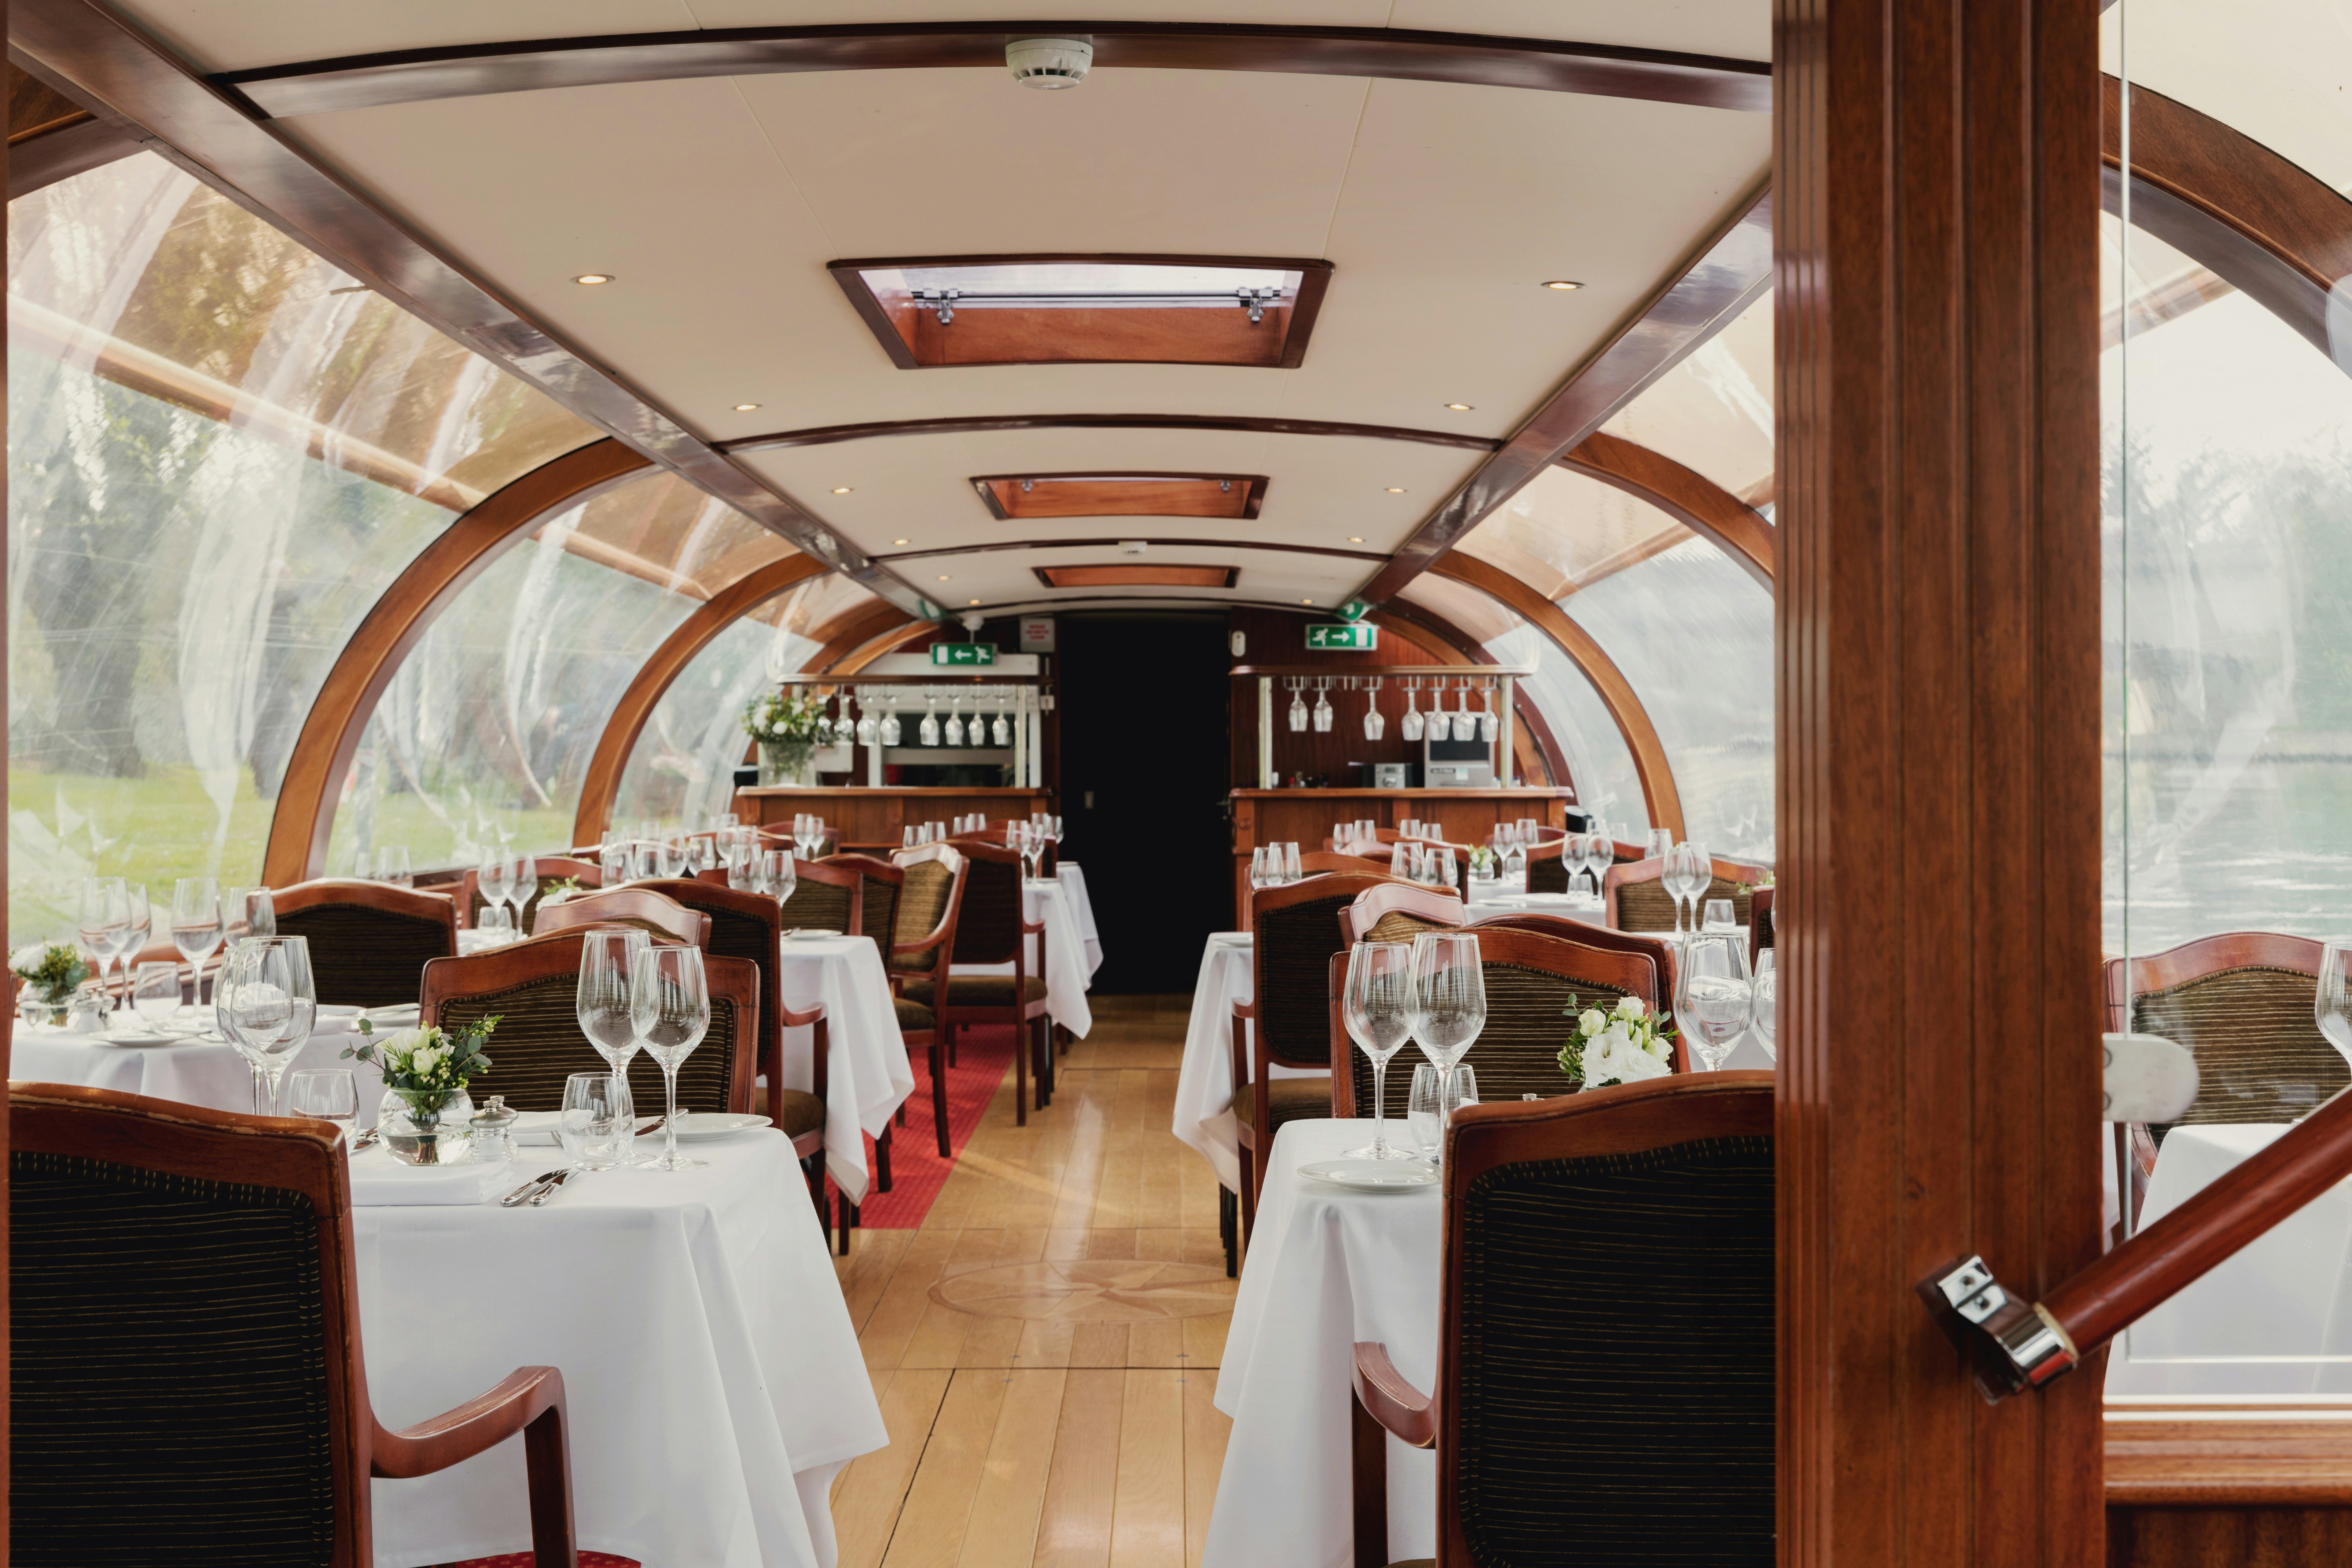 Bateaux London - Willow Room image 1